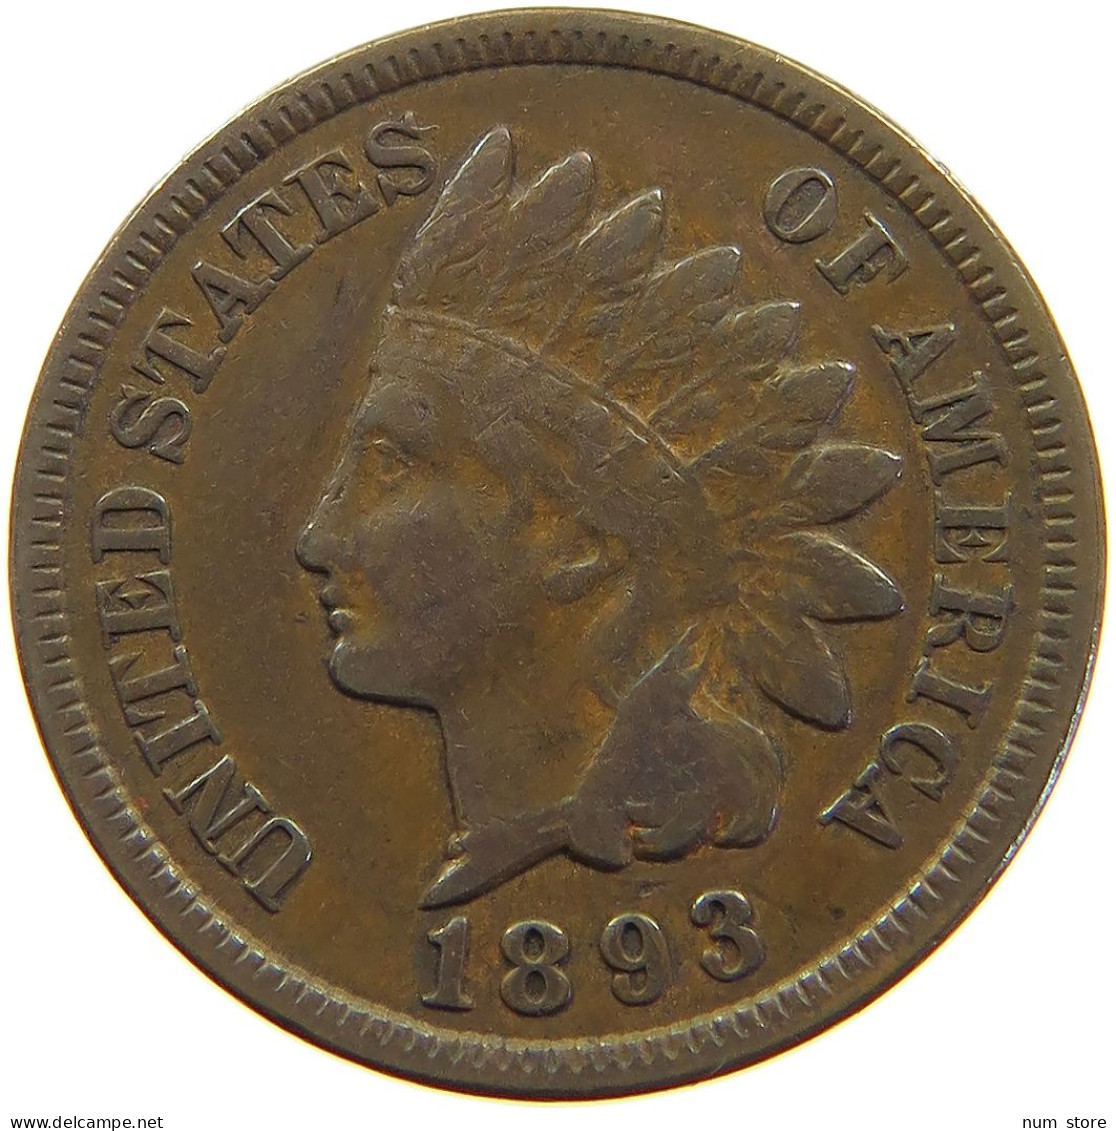 UNITED STATES OF AMERICA CENT 1893 INDIAN HEAD #a063 0255 - 1859-1909: Indian Head